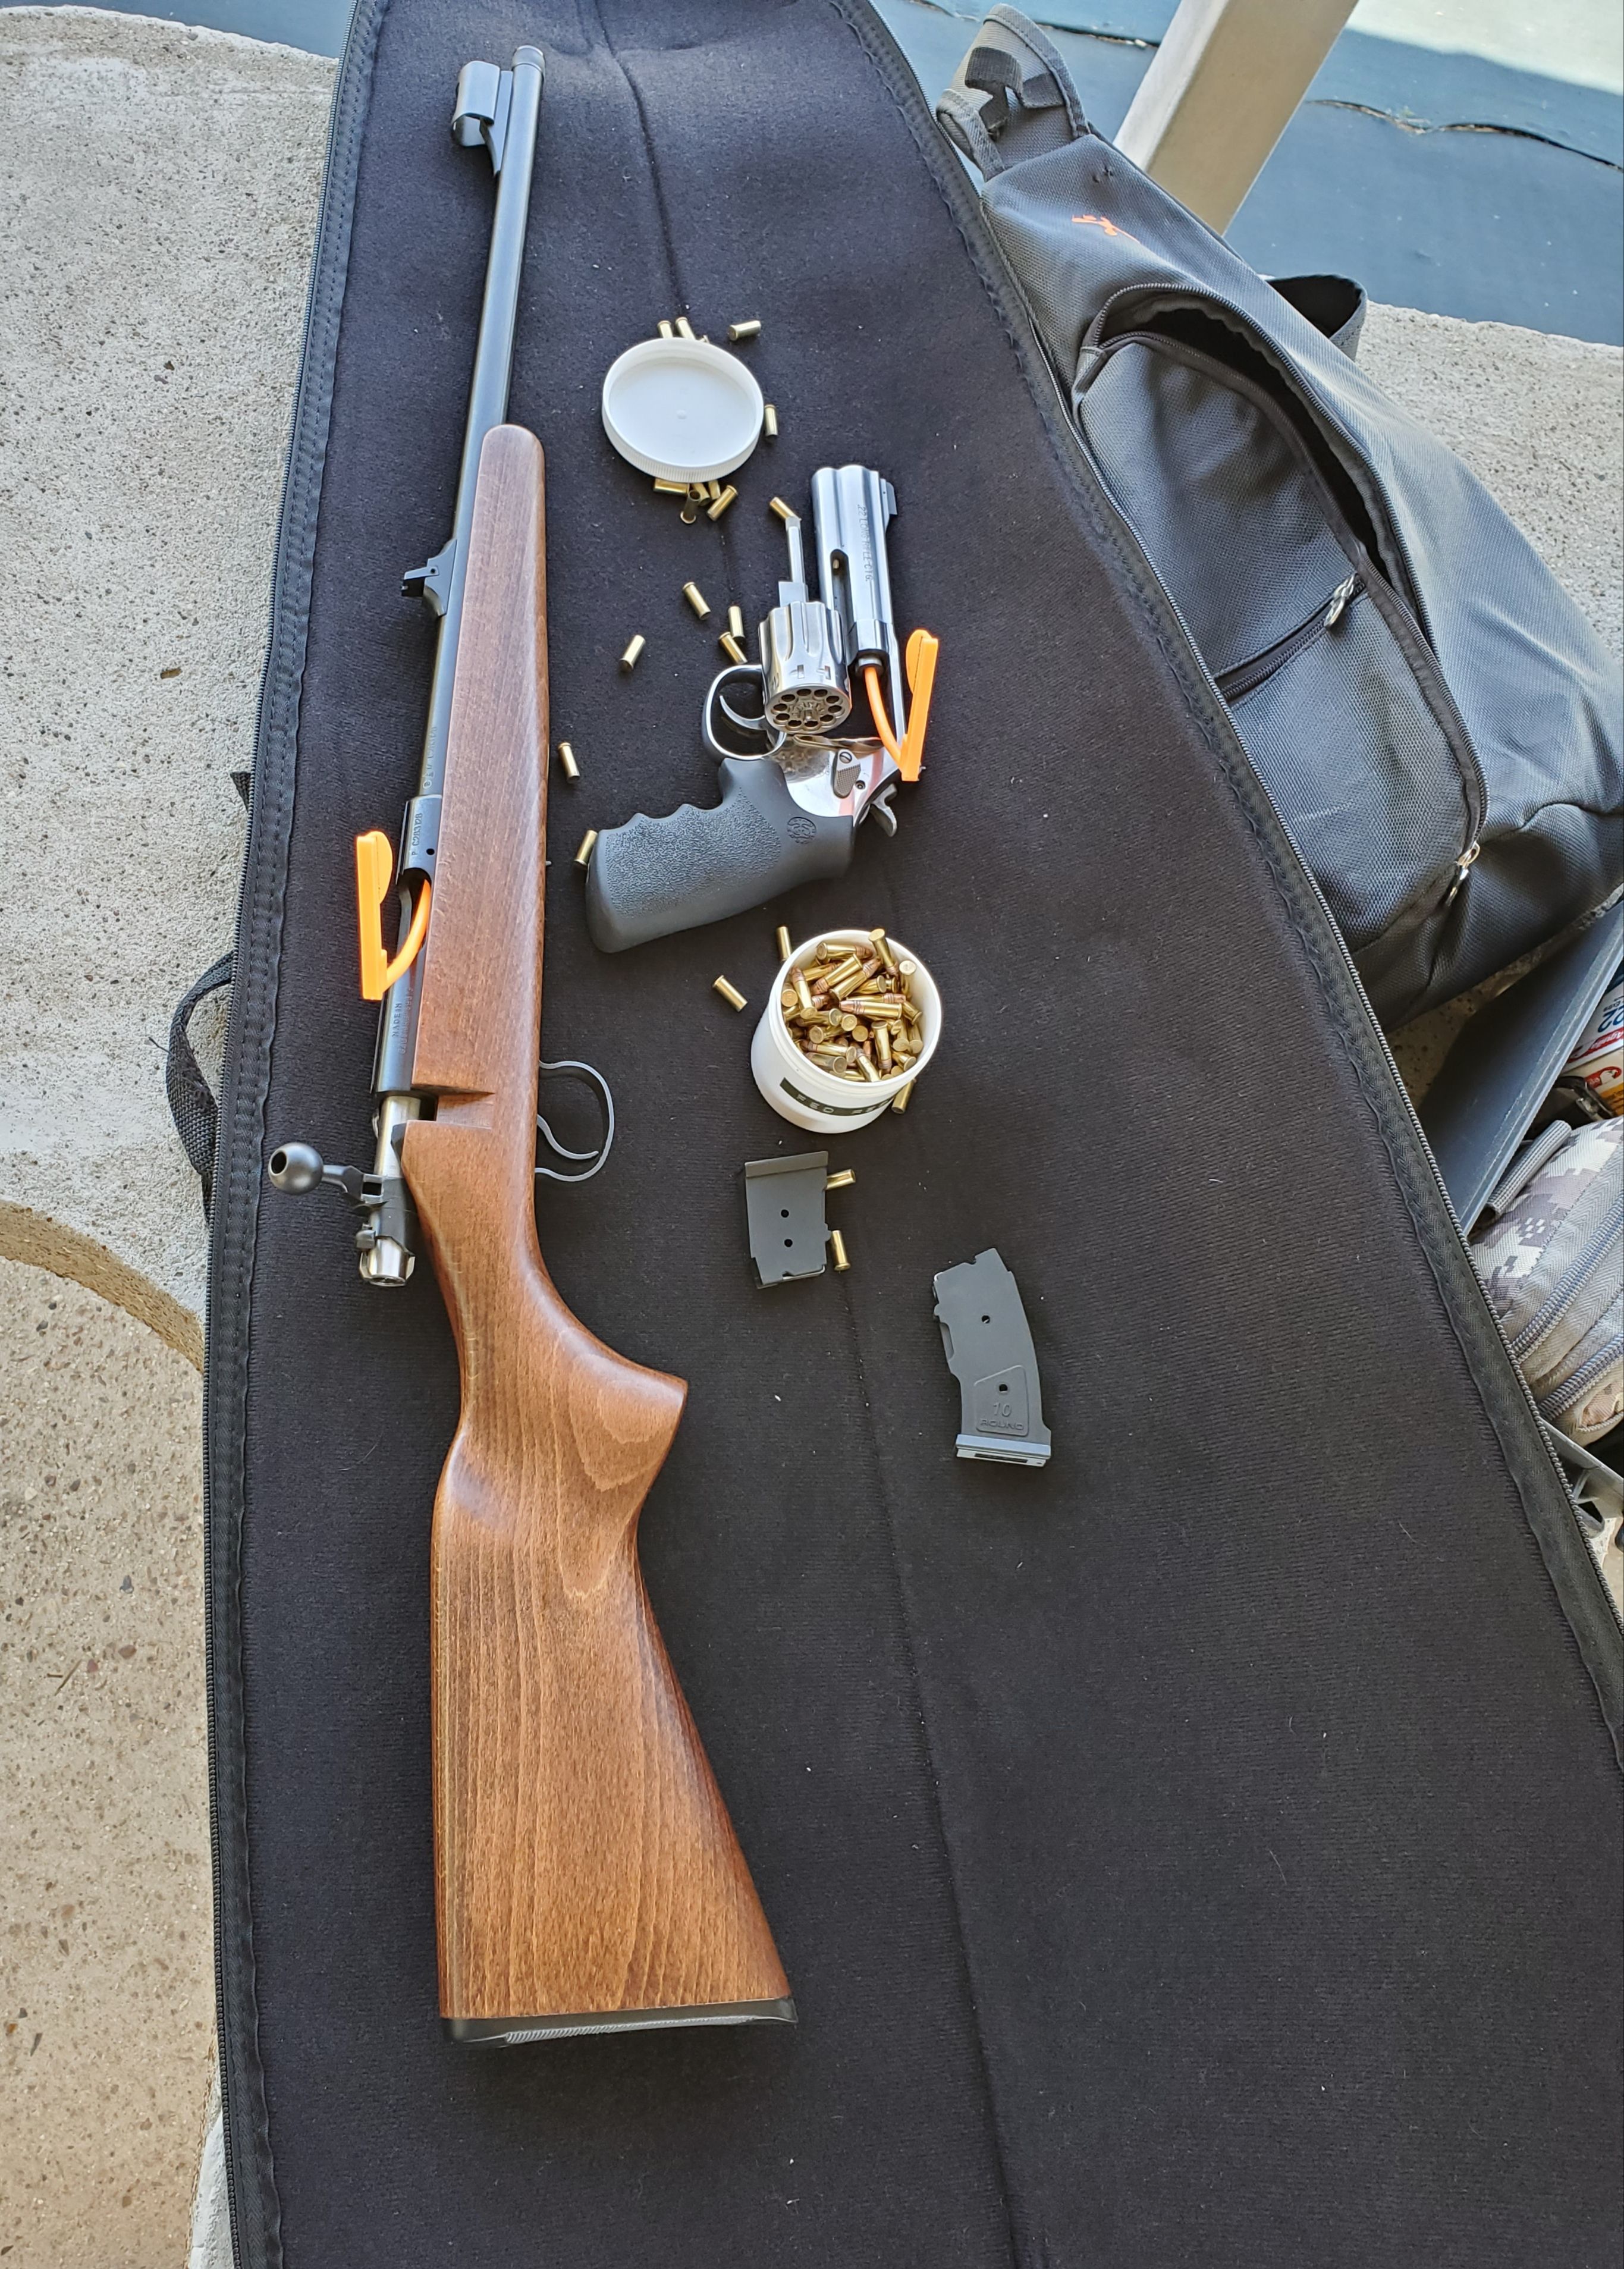 CZ455 Scout and S&W M610 210411 733.jpg